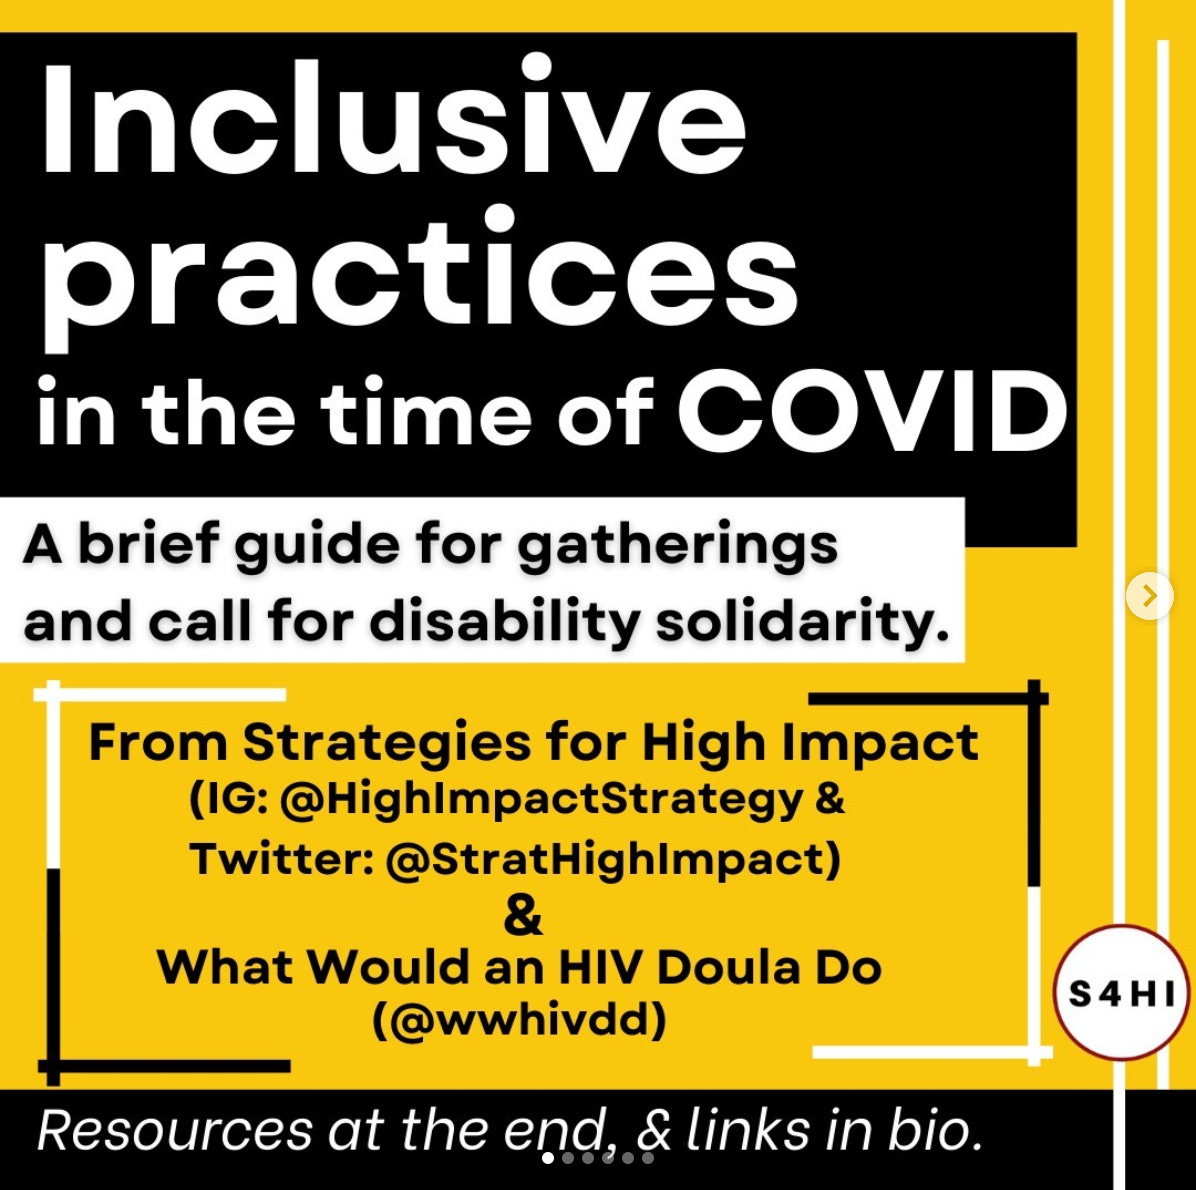 White and black text on black, yellow, and white backgrounds. Title says “Inclusive practices in the time of COVID: A brief guide for gatherings and call for disability solidarity.” Text below says “From Strategies for High Impact: (IG: @HighImpactStrategy & Twitter: @StratHighImpact) and What Would an HIV Doula Do (@wwhivdd)” “Resources at the end, and links in bio.”